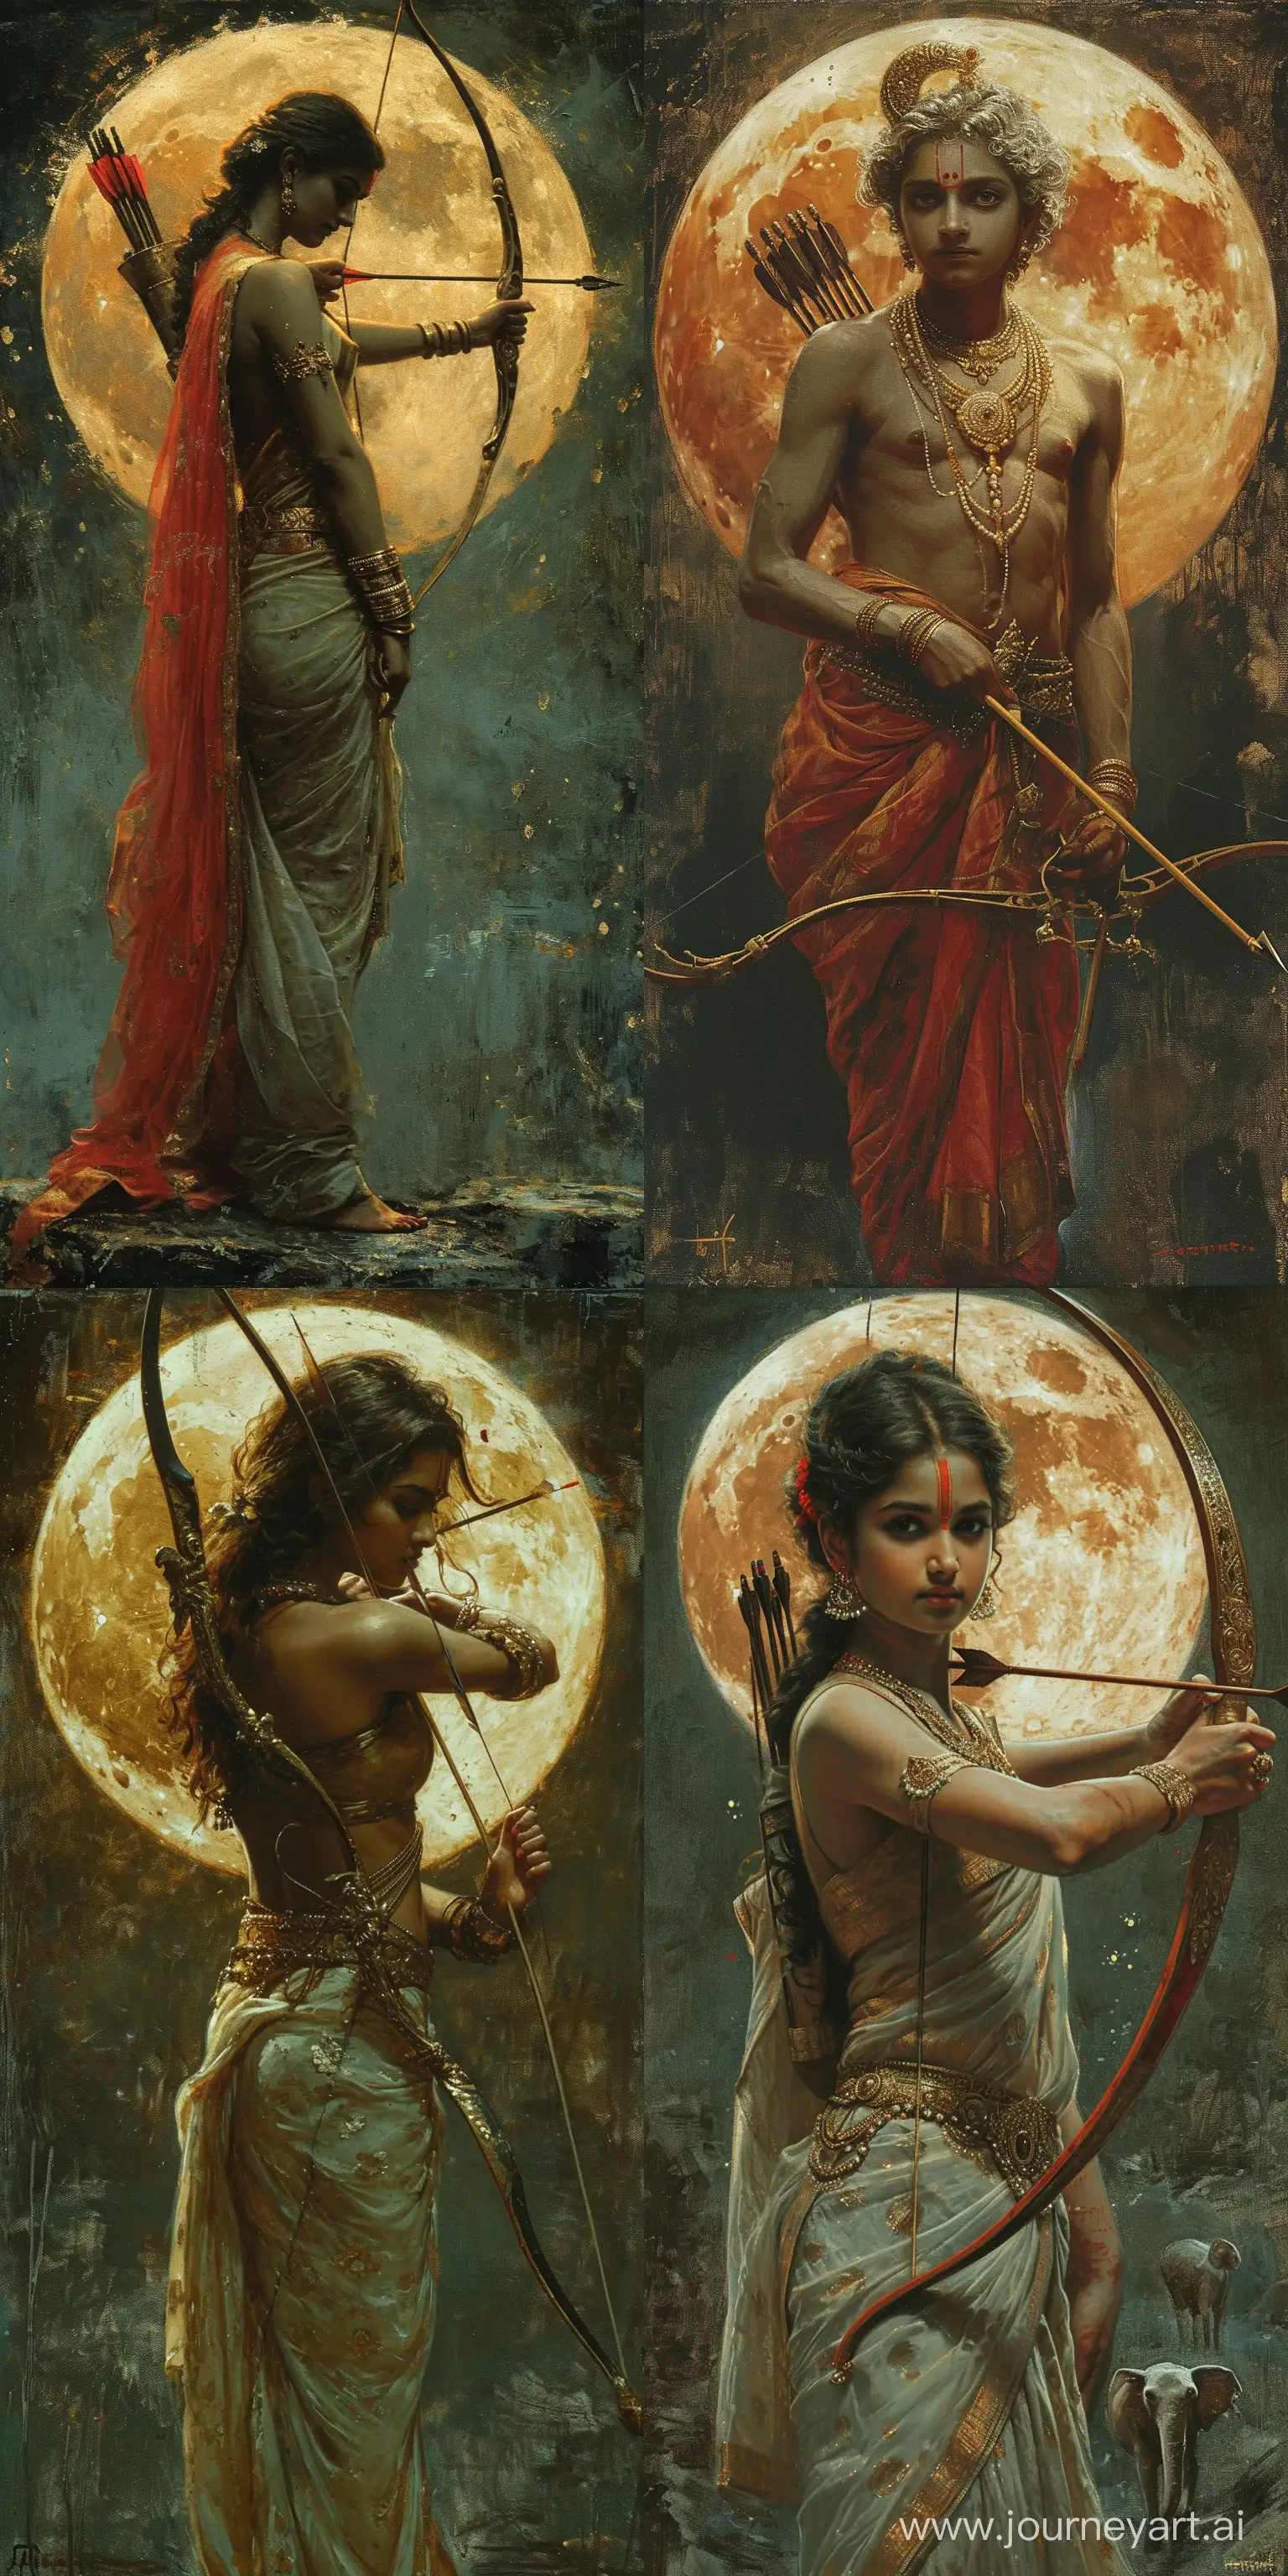 Divine-Art-Lord-Ram-with-Bow-and-Arrow-under-the-Moonlight